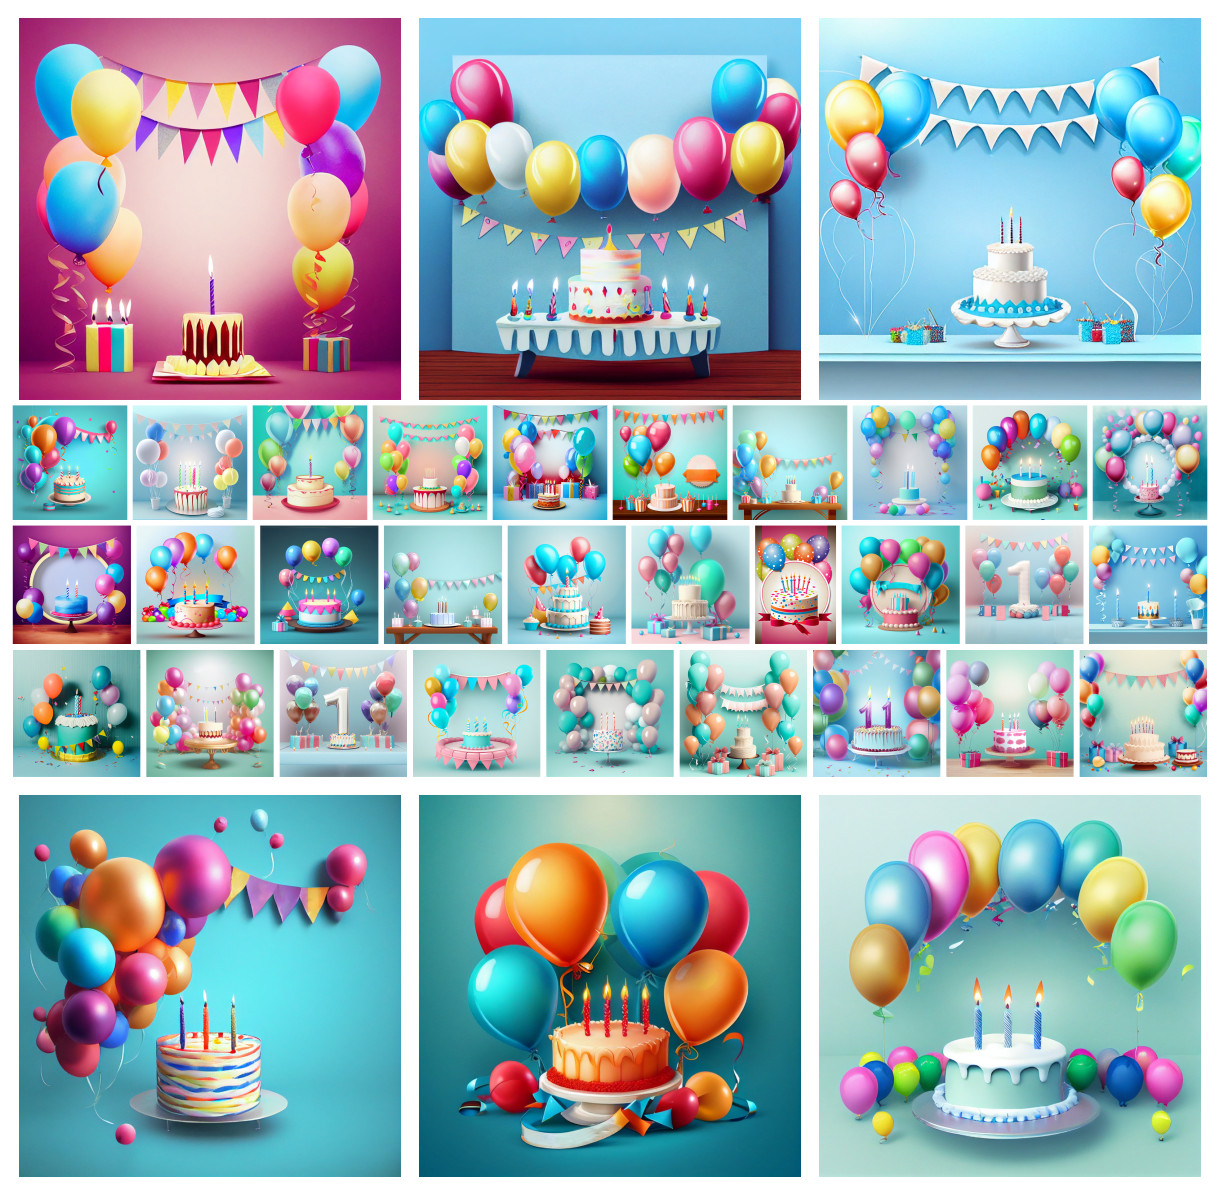 Artistic Expressions: Unique Happy Birthday Art Collection